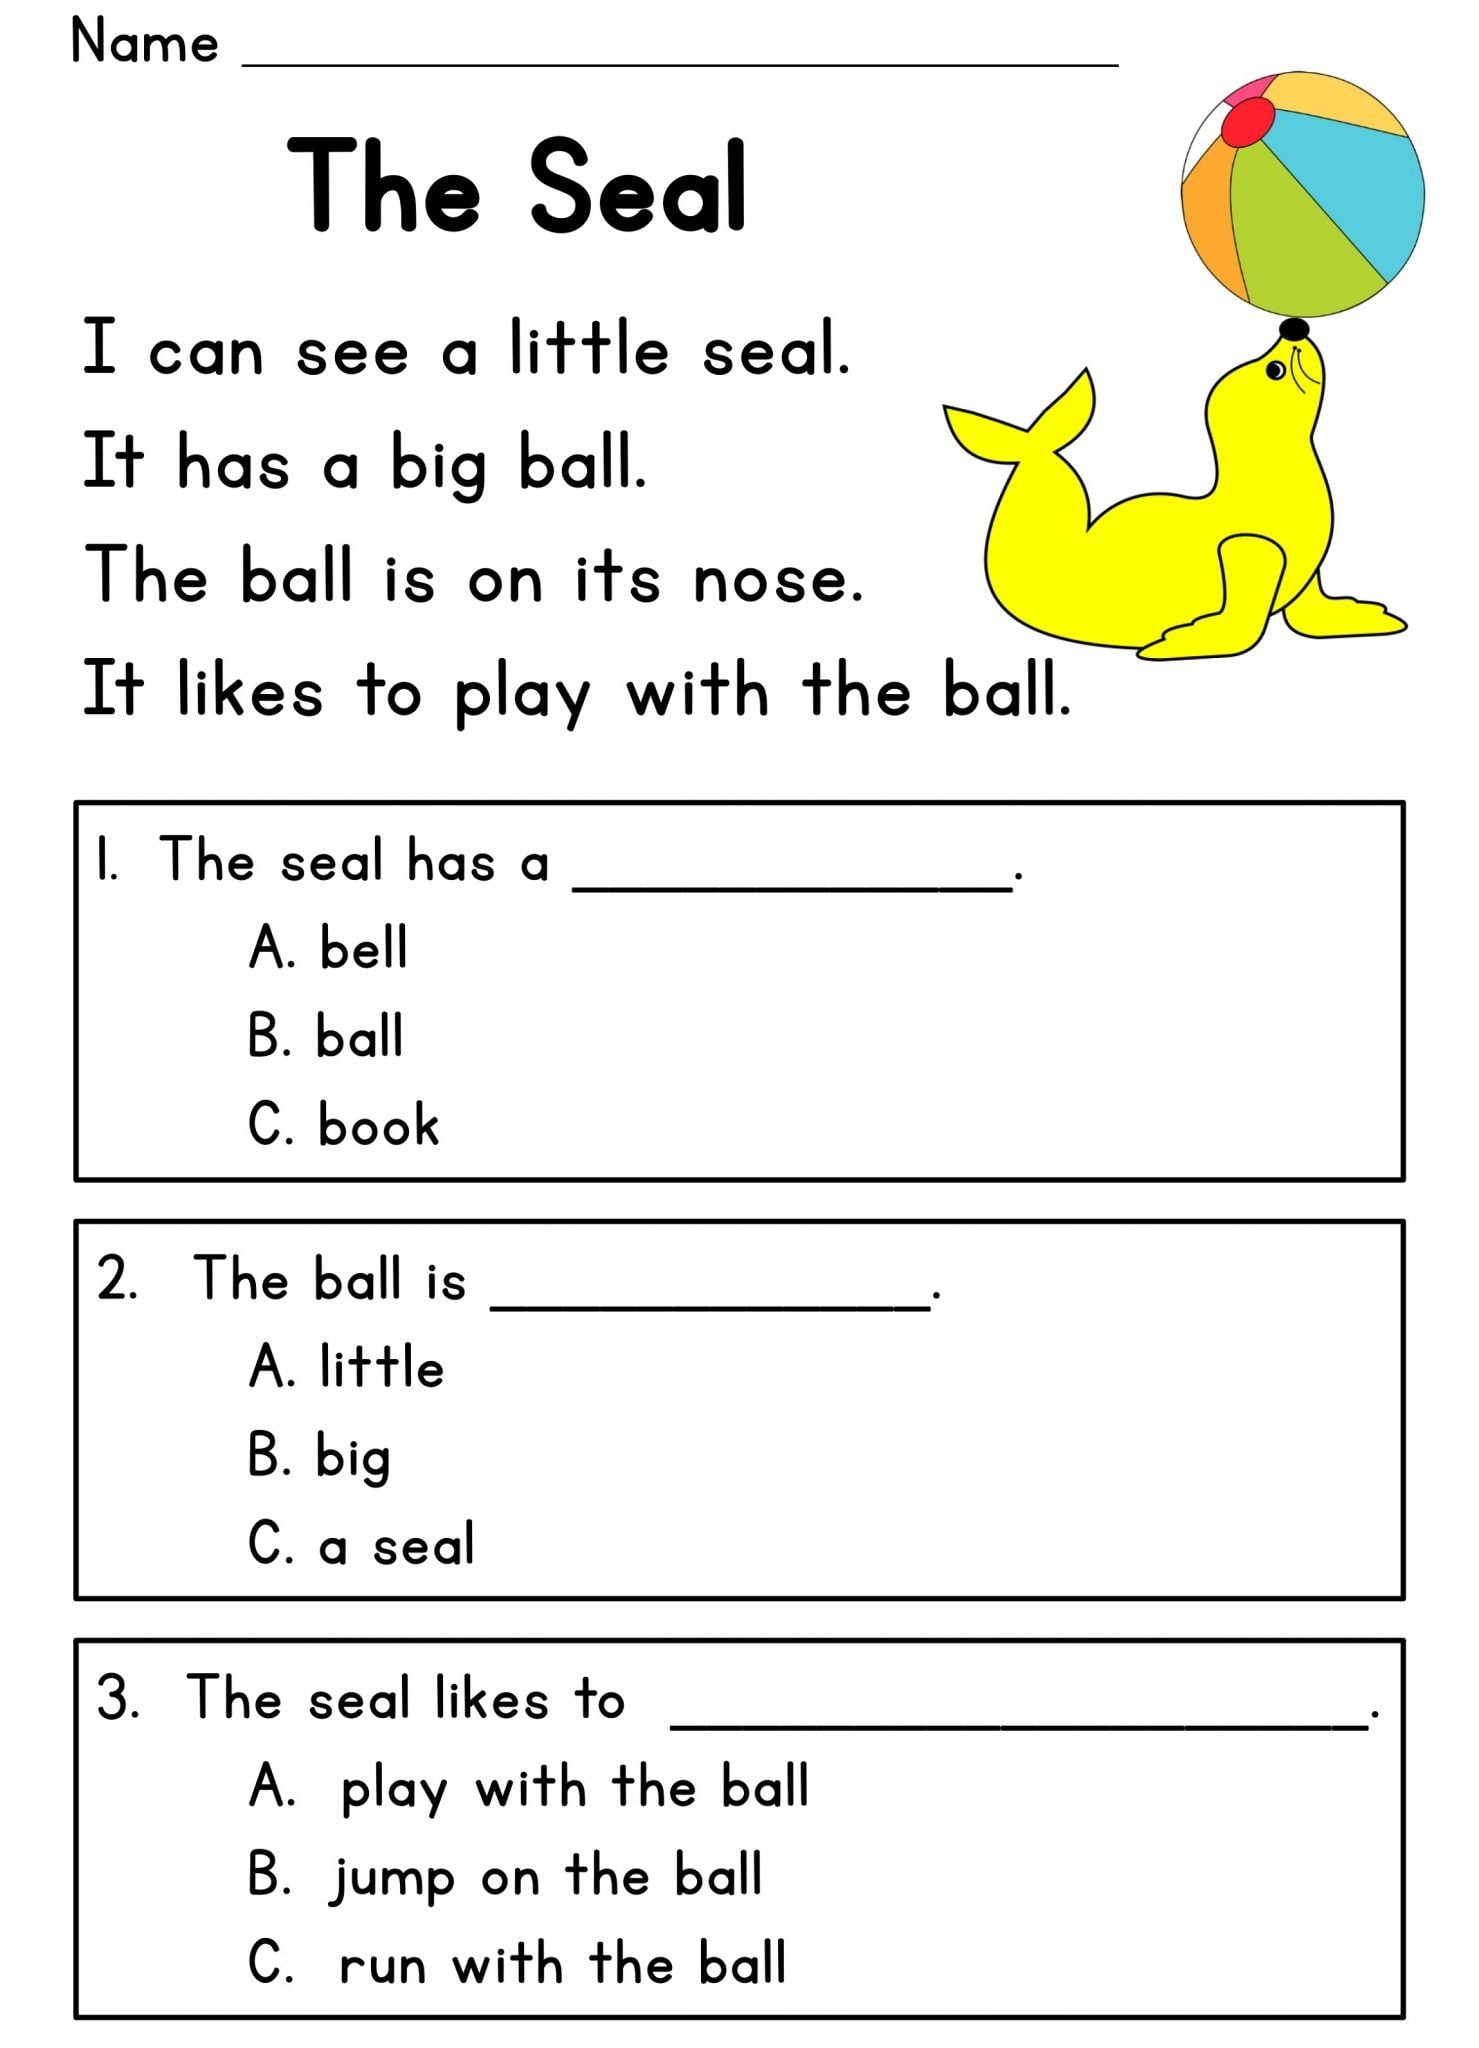 Free Printable Worksheets For 5 Year Olds Educative Printable Reading Comprehension Reading Comprehension Passages Reading Comprehension Kindergarten